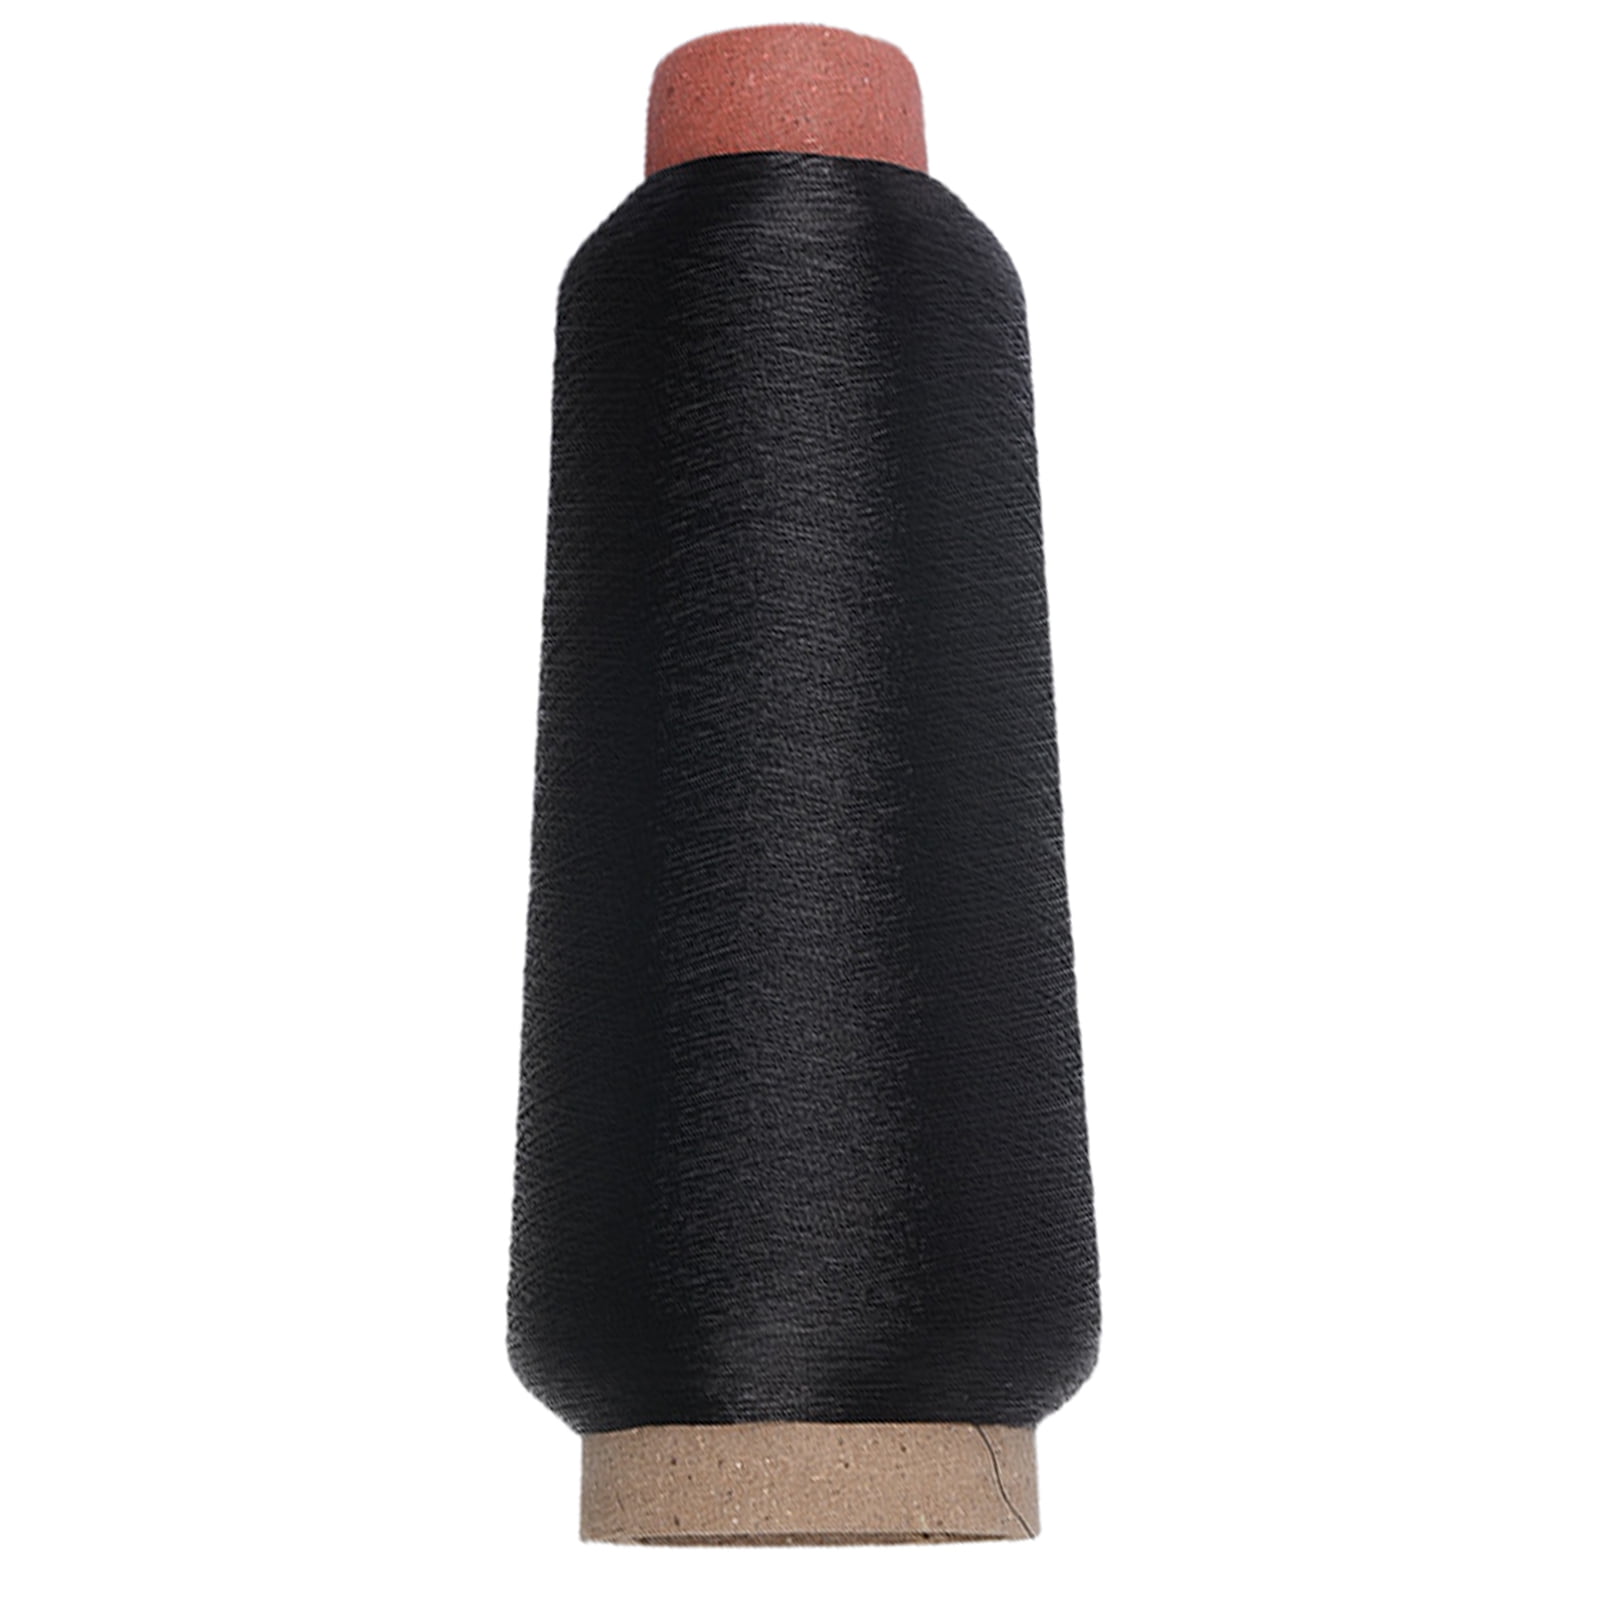 Metallic Embroidery Thread | No. L73 - Navy | 500 Meter Cones (550 Yards) |  25 Brilliant Shiny Colors | For Machine Embroidery